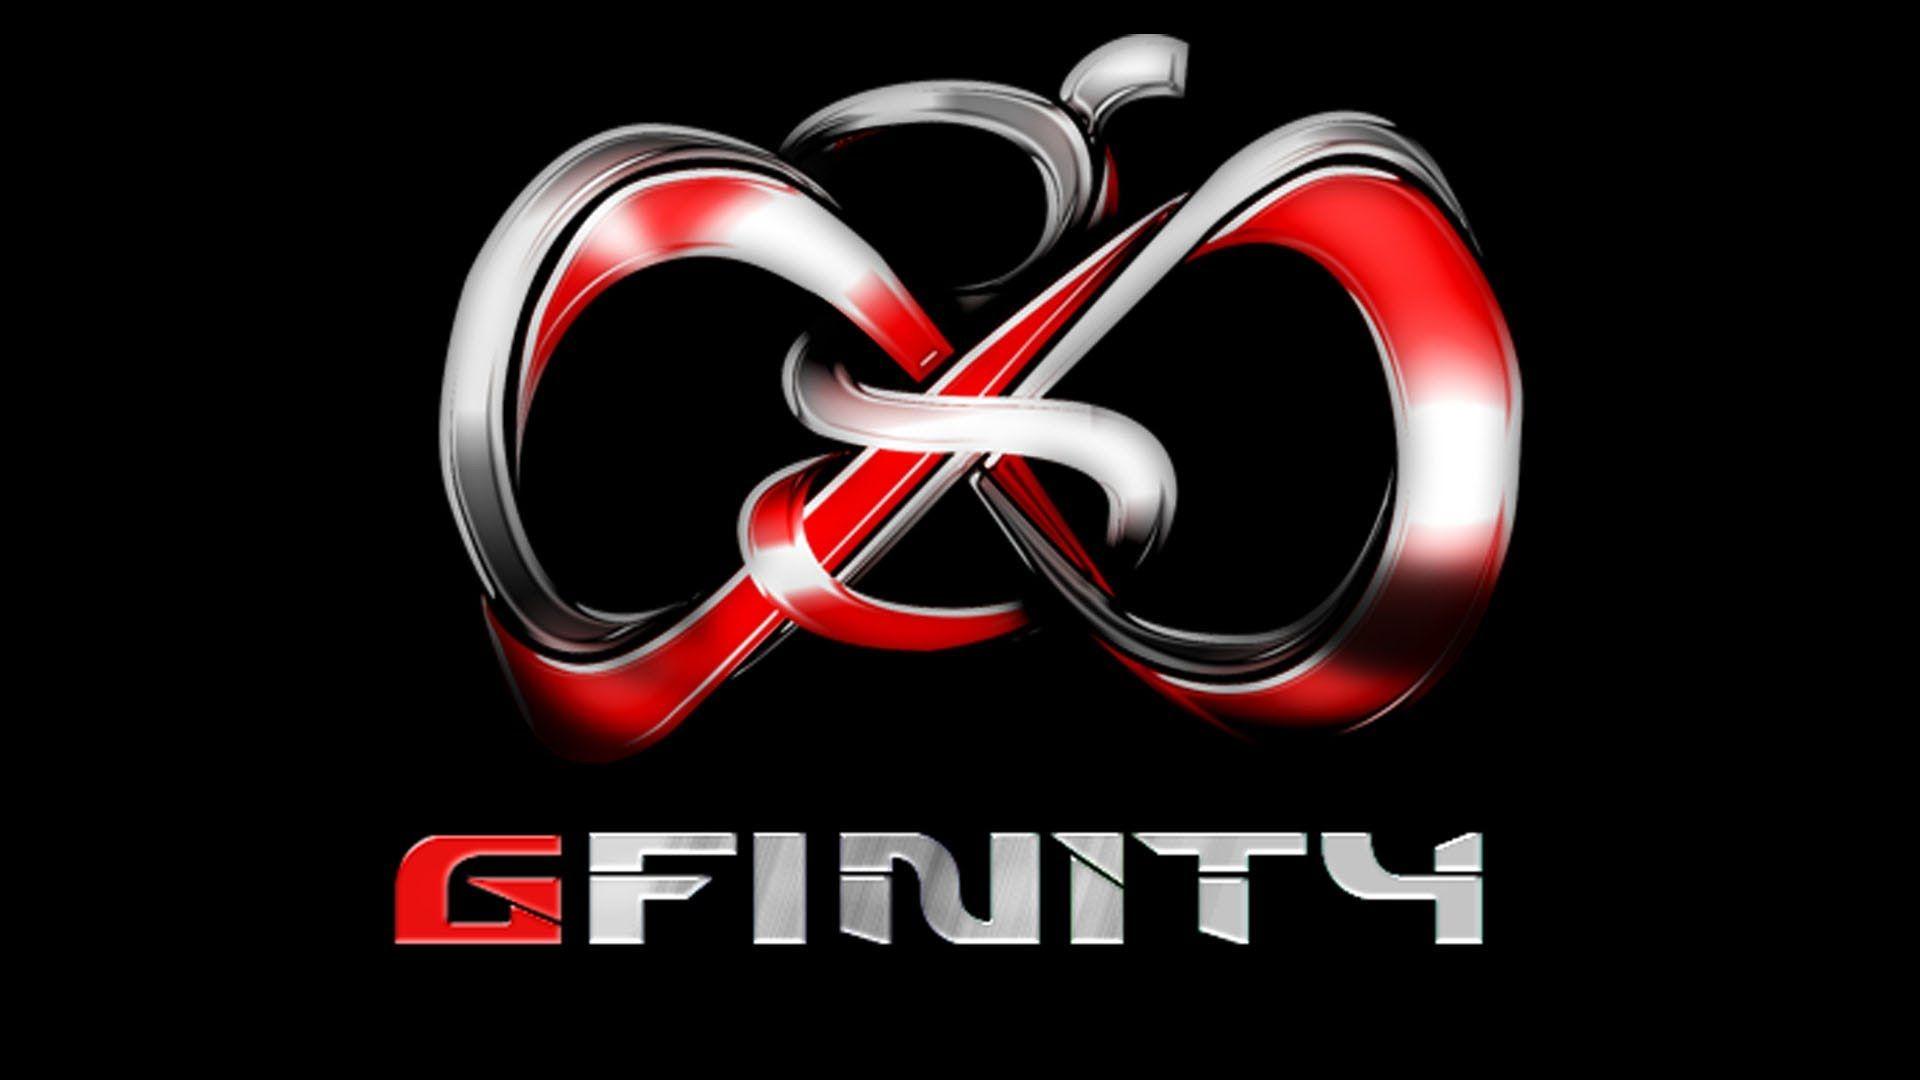 Gfinity Logo - Gfinity 3 Call of Duty: Ghosts Results | Beyond Entertainment